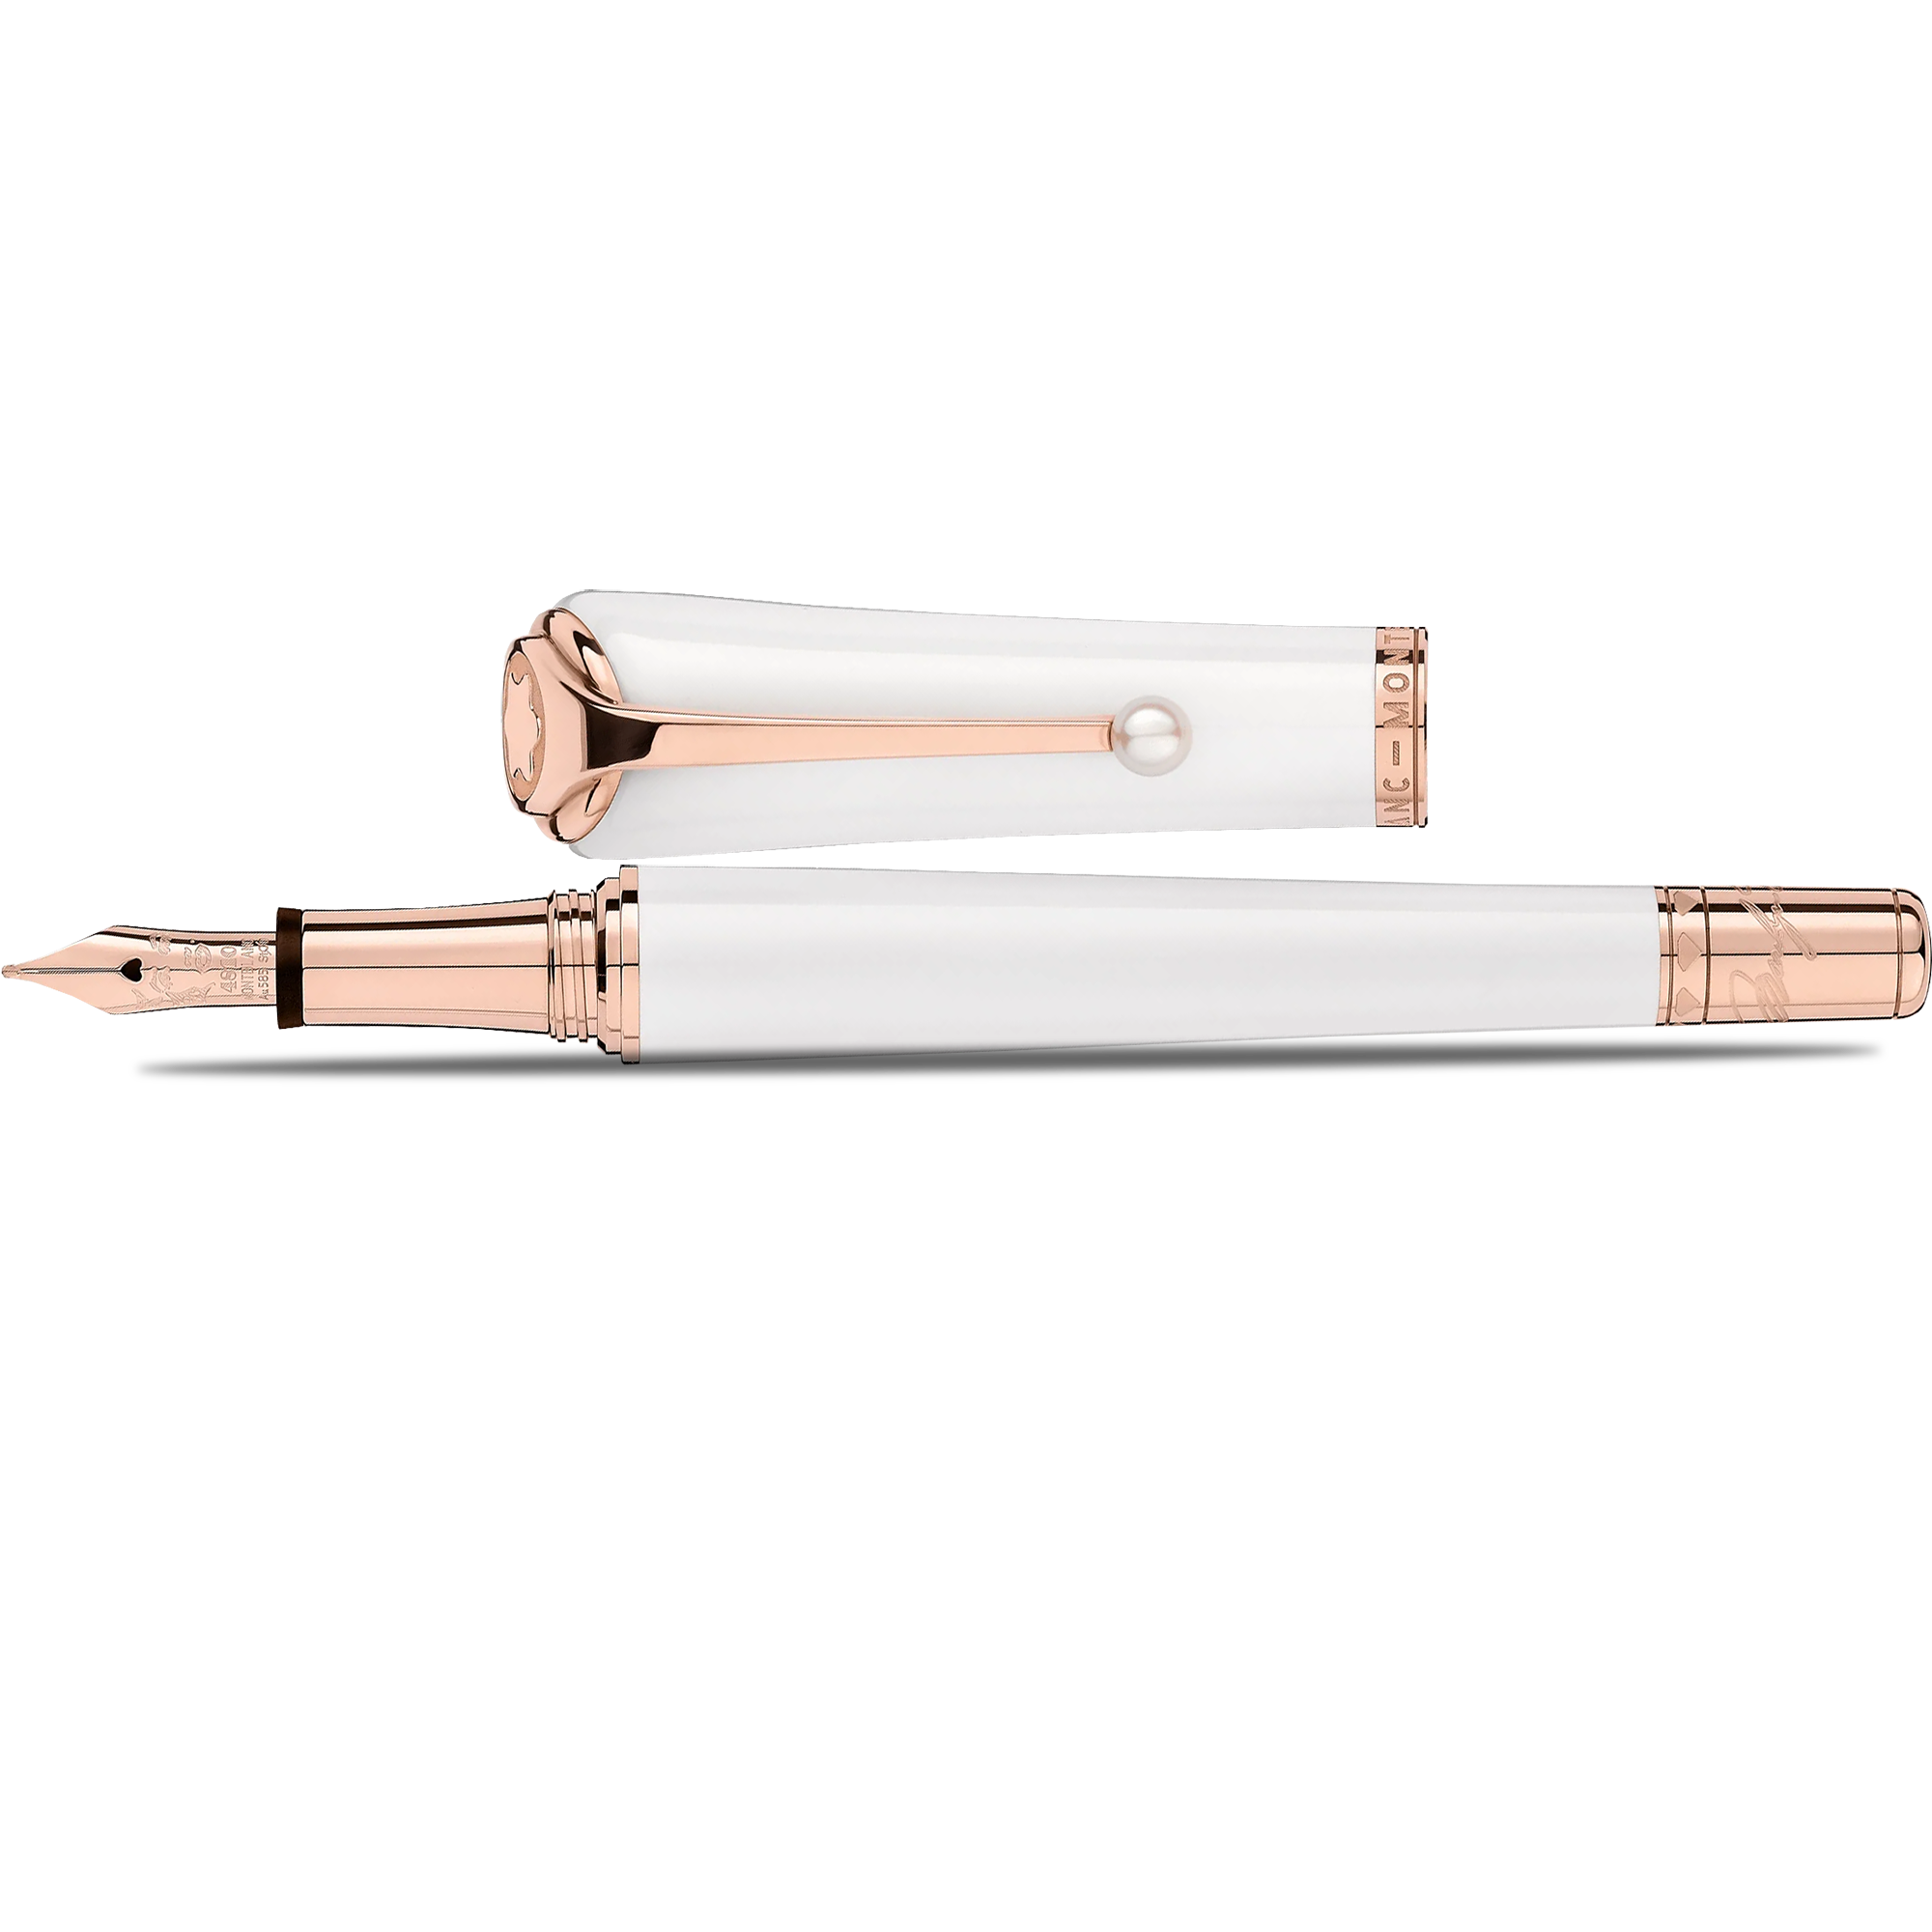 Montblanc Muses Marilyn Monroe Fountain Pen - Special Edition - Pearl-Pen Boutique Ltd